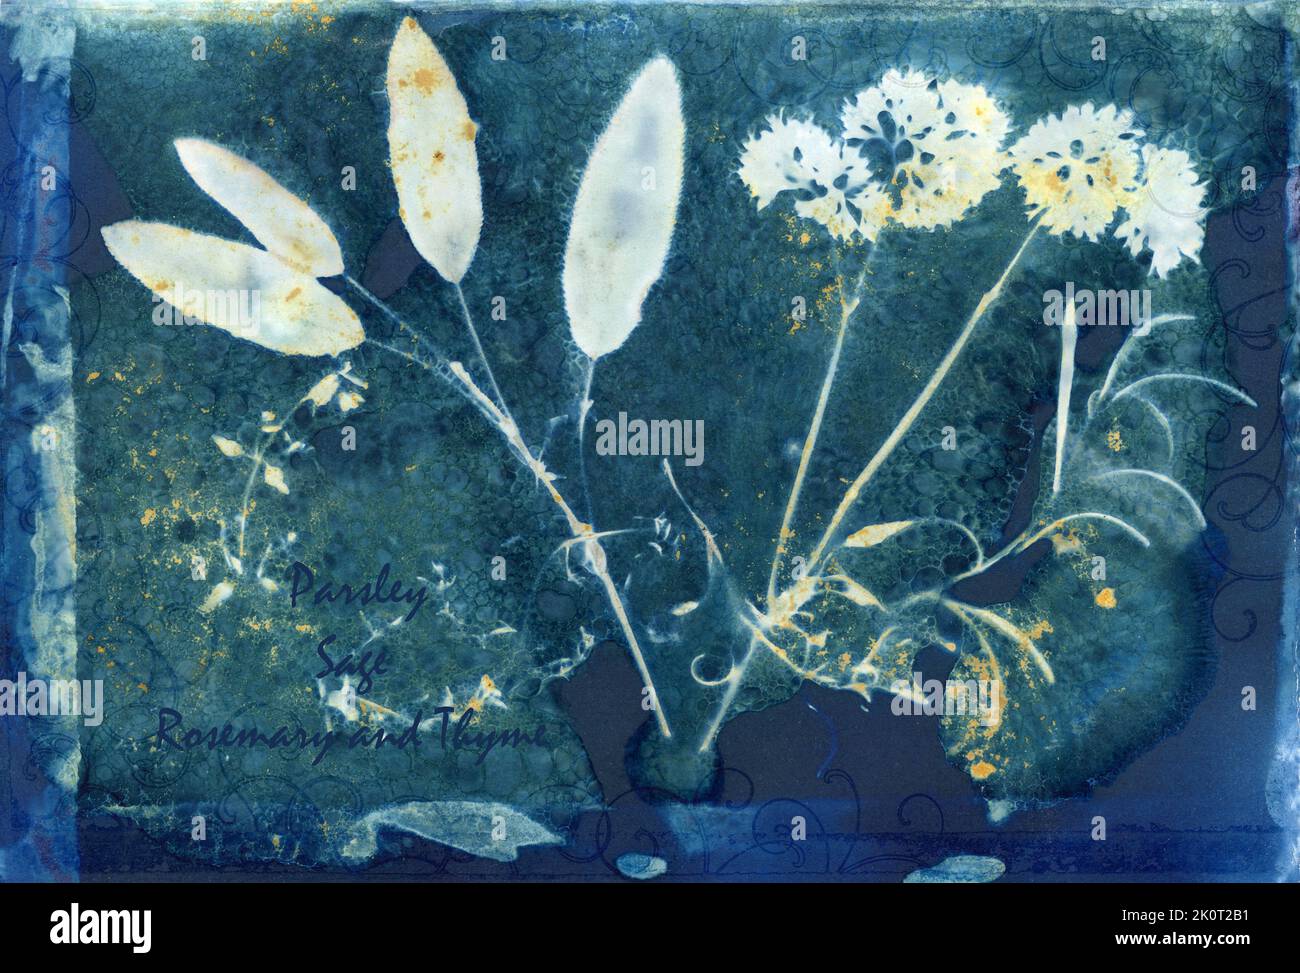 Wet cyanotype print, parsley sage rosemary and thyme, herb contact print, alternative photography process Stock Photo